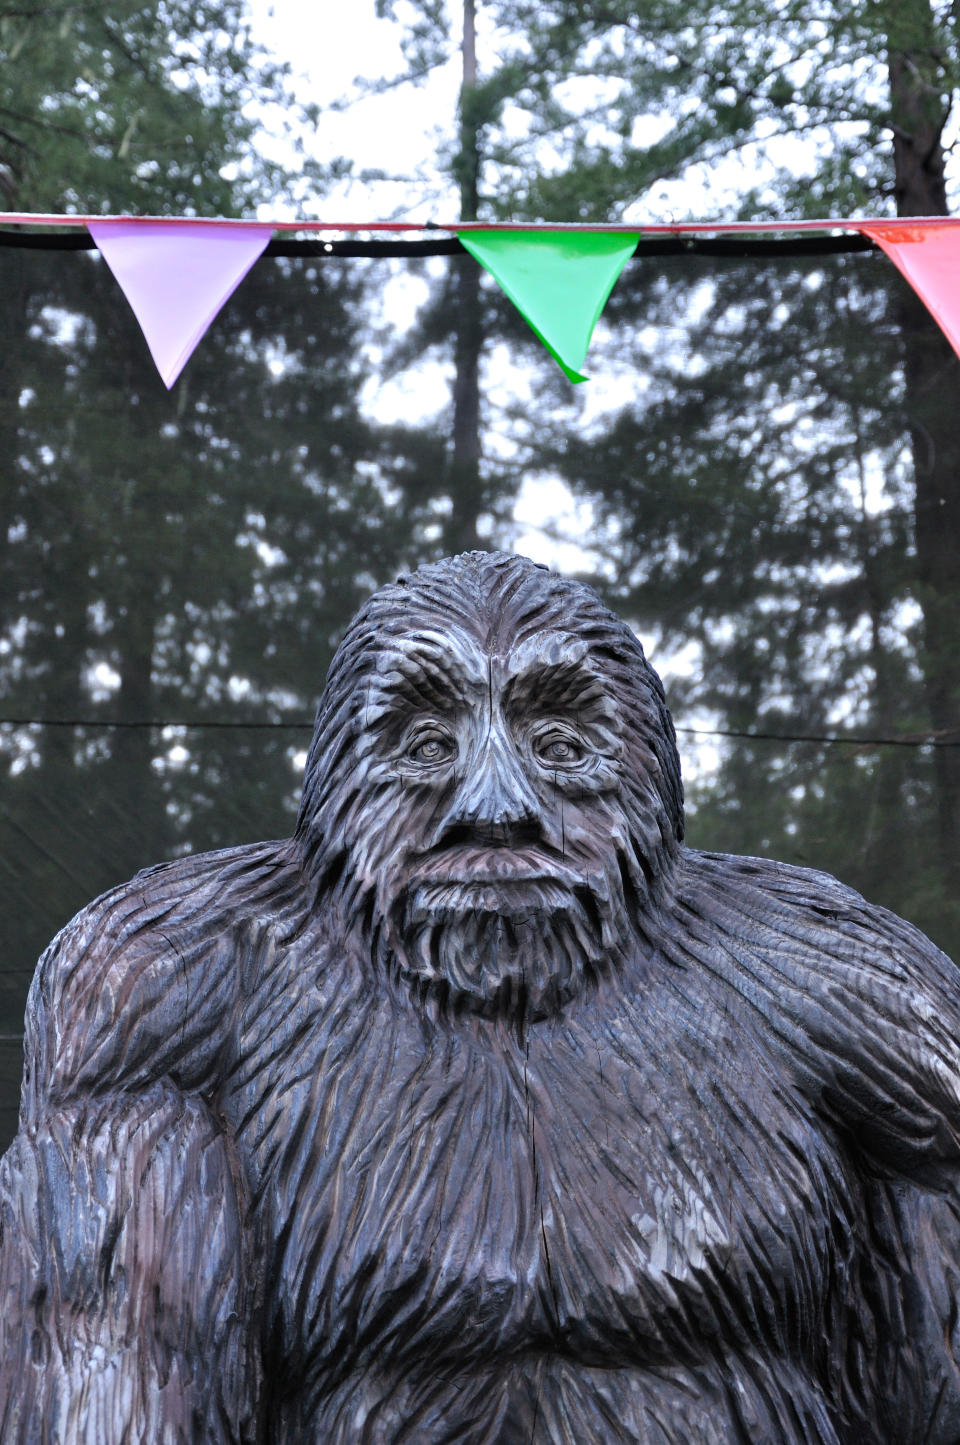 California not only boasts 428 Bigfoot sightings, but two different Bigfoot museums.